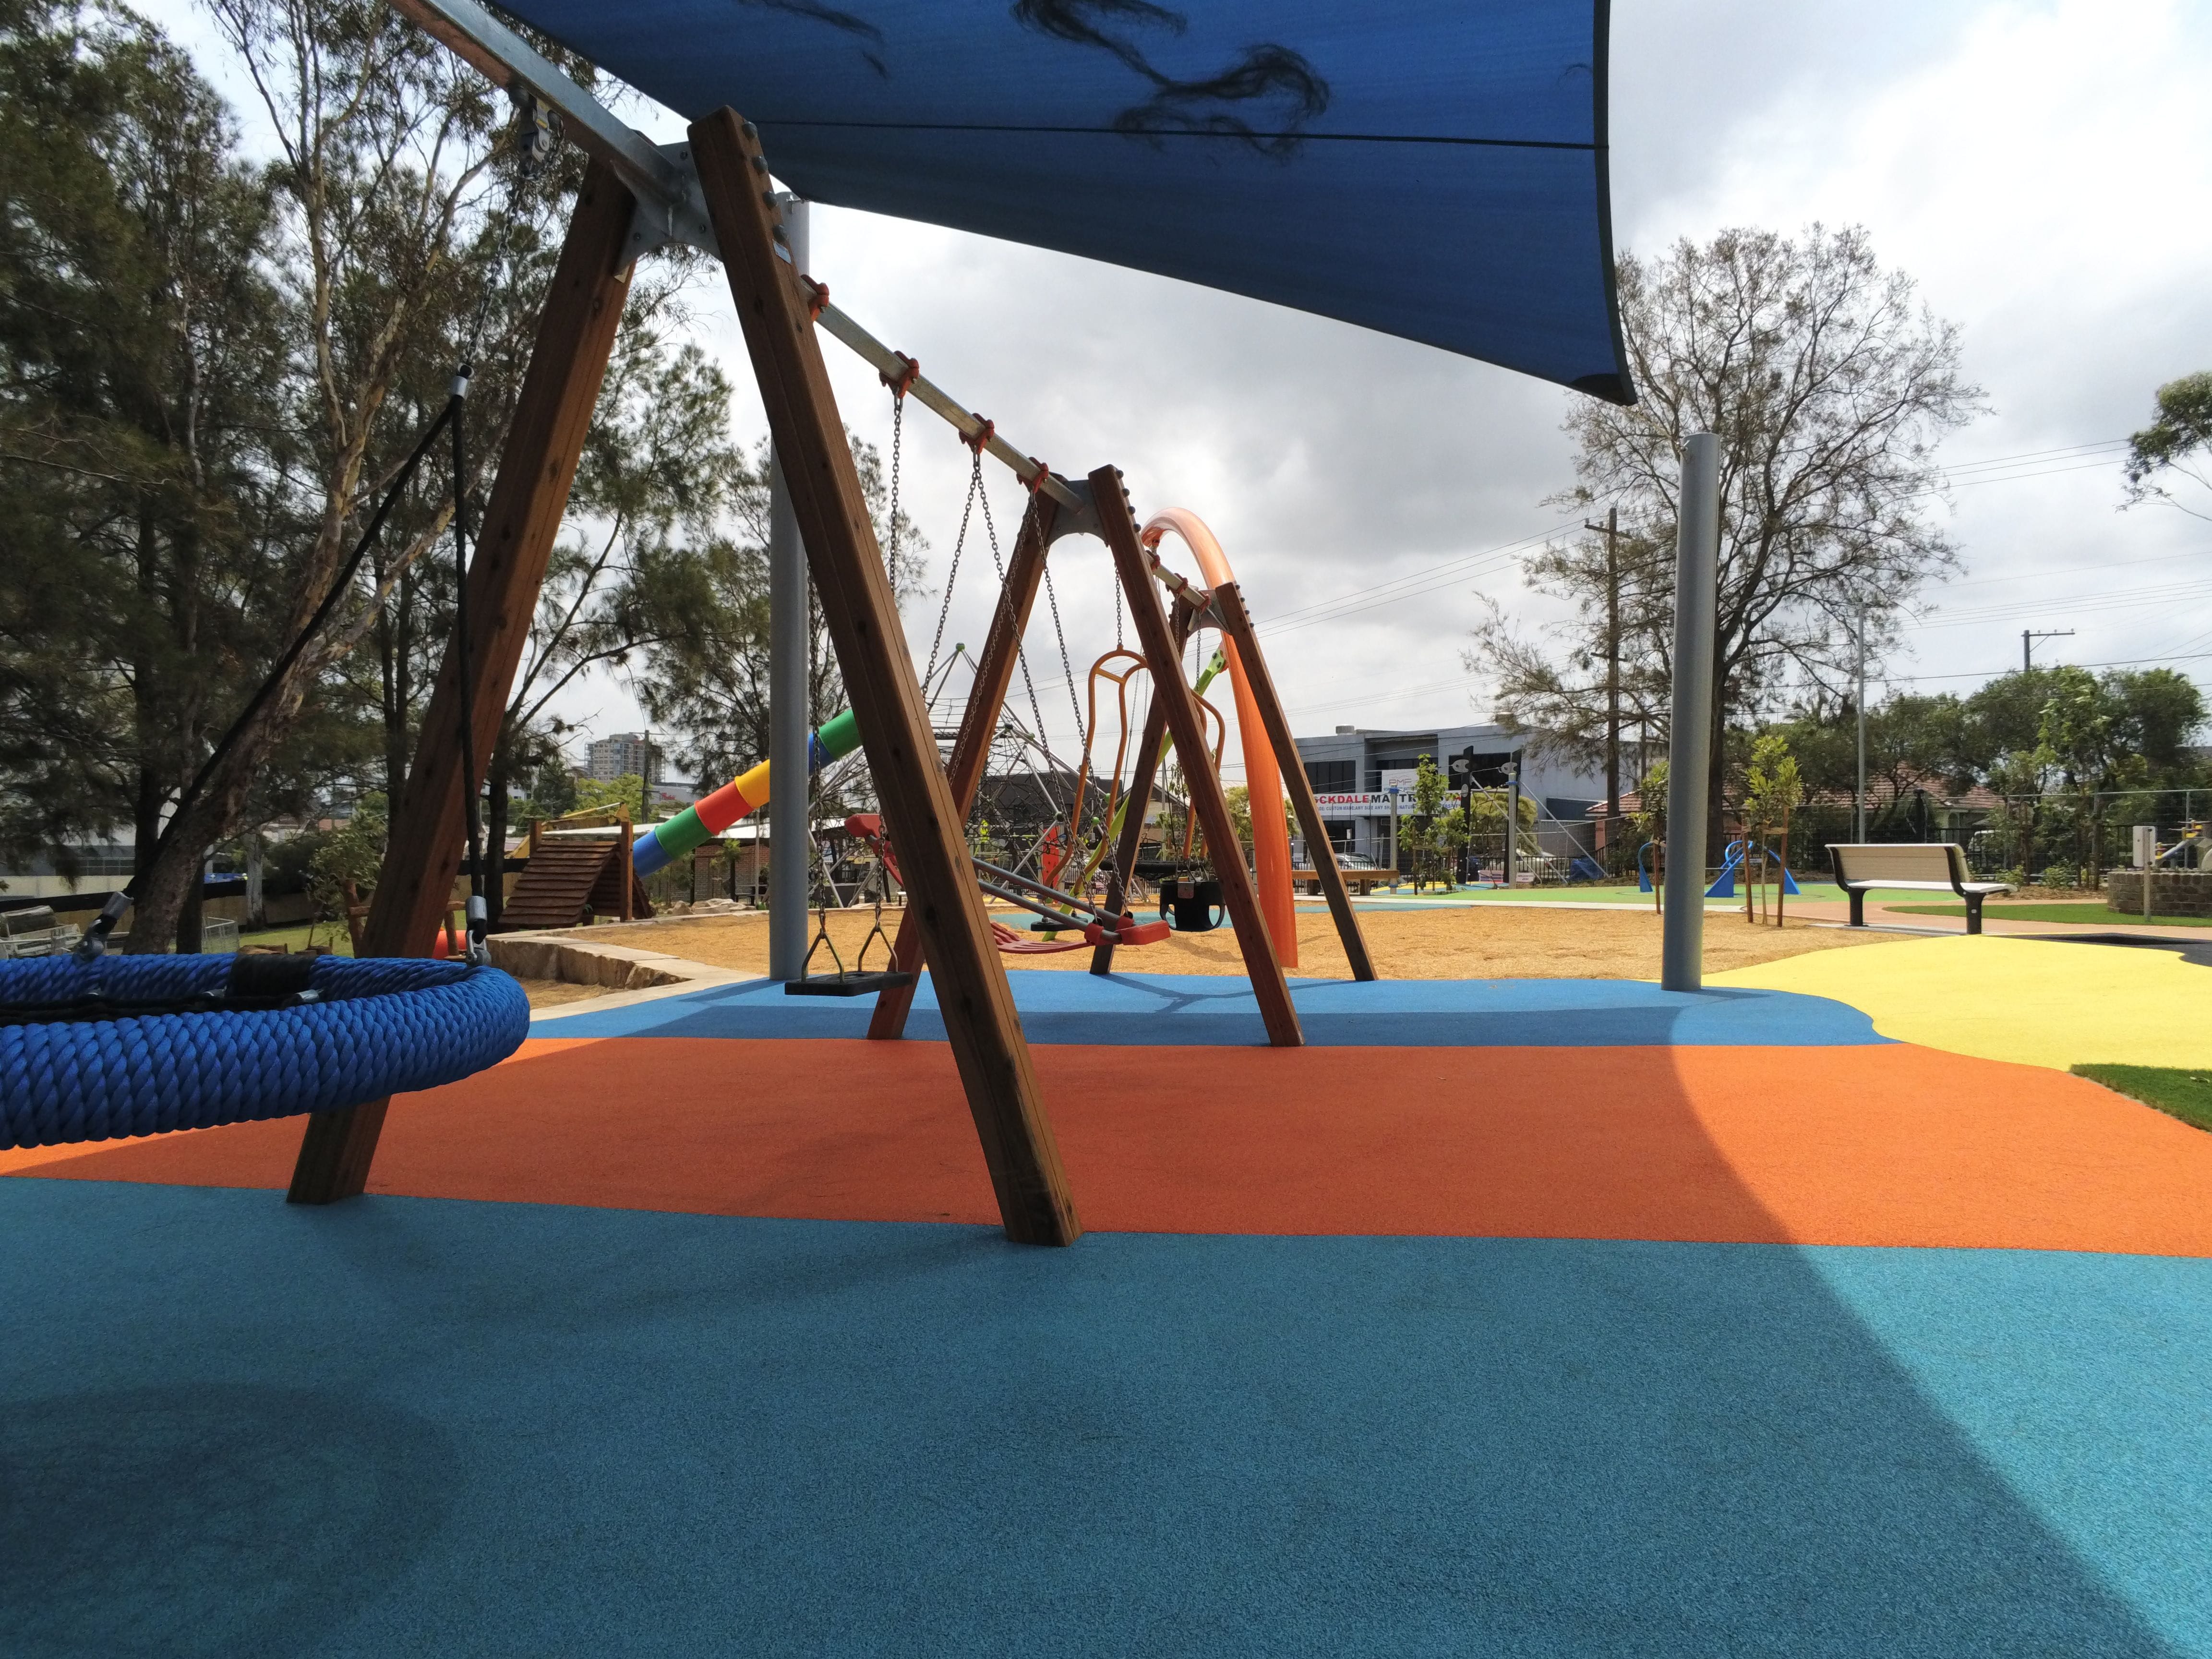 Australian Sports & Safety Surfaces - Inclusive Adventure Playground and Bike Training Circuit at Kempt Field Image -5df9790978040